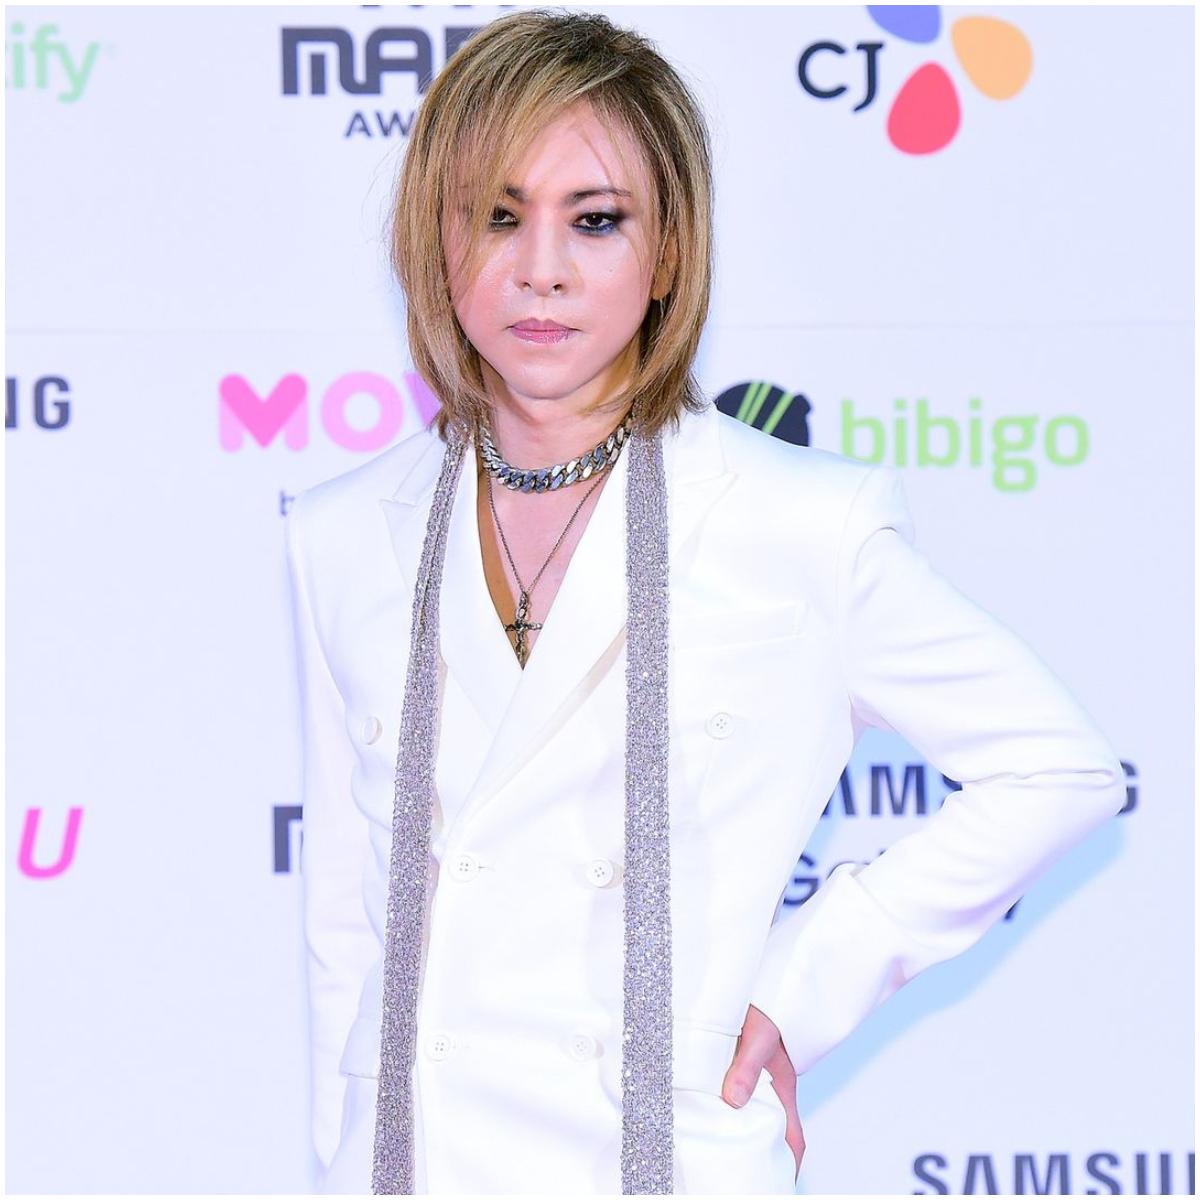 Yoshiki, 58, one of the most influential musicians and composers in Japanese history, was also at the event